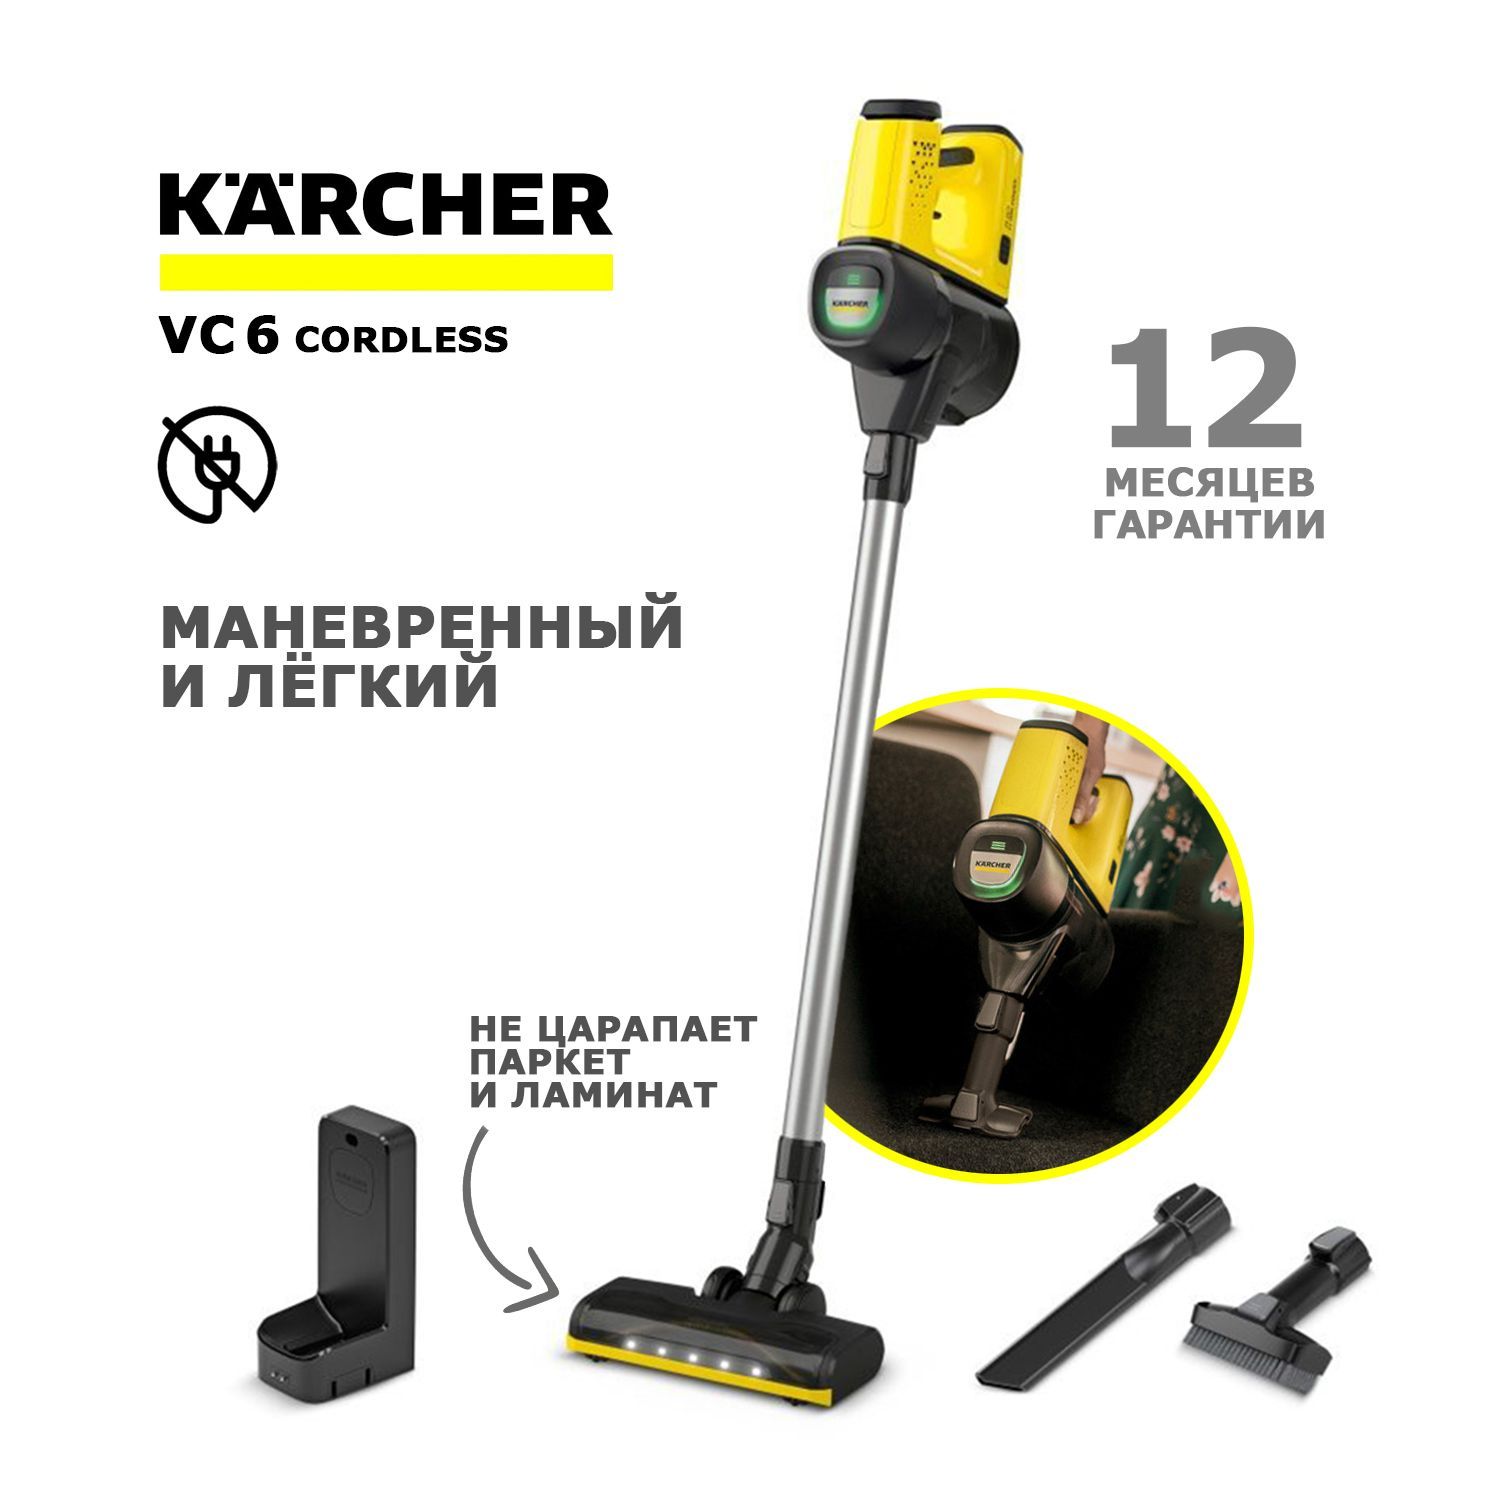 Vc 6 cordless ourfamily pet. Пылесос Karcher VC 6 Cordless ourfamily 1.198-660.0. Пылесос Karcher VC 6 Cordless ourfamily Pet.